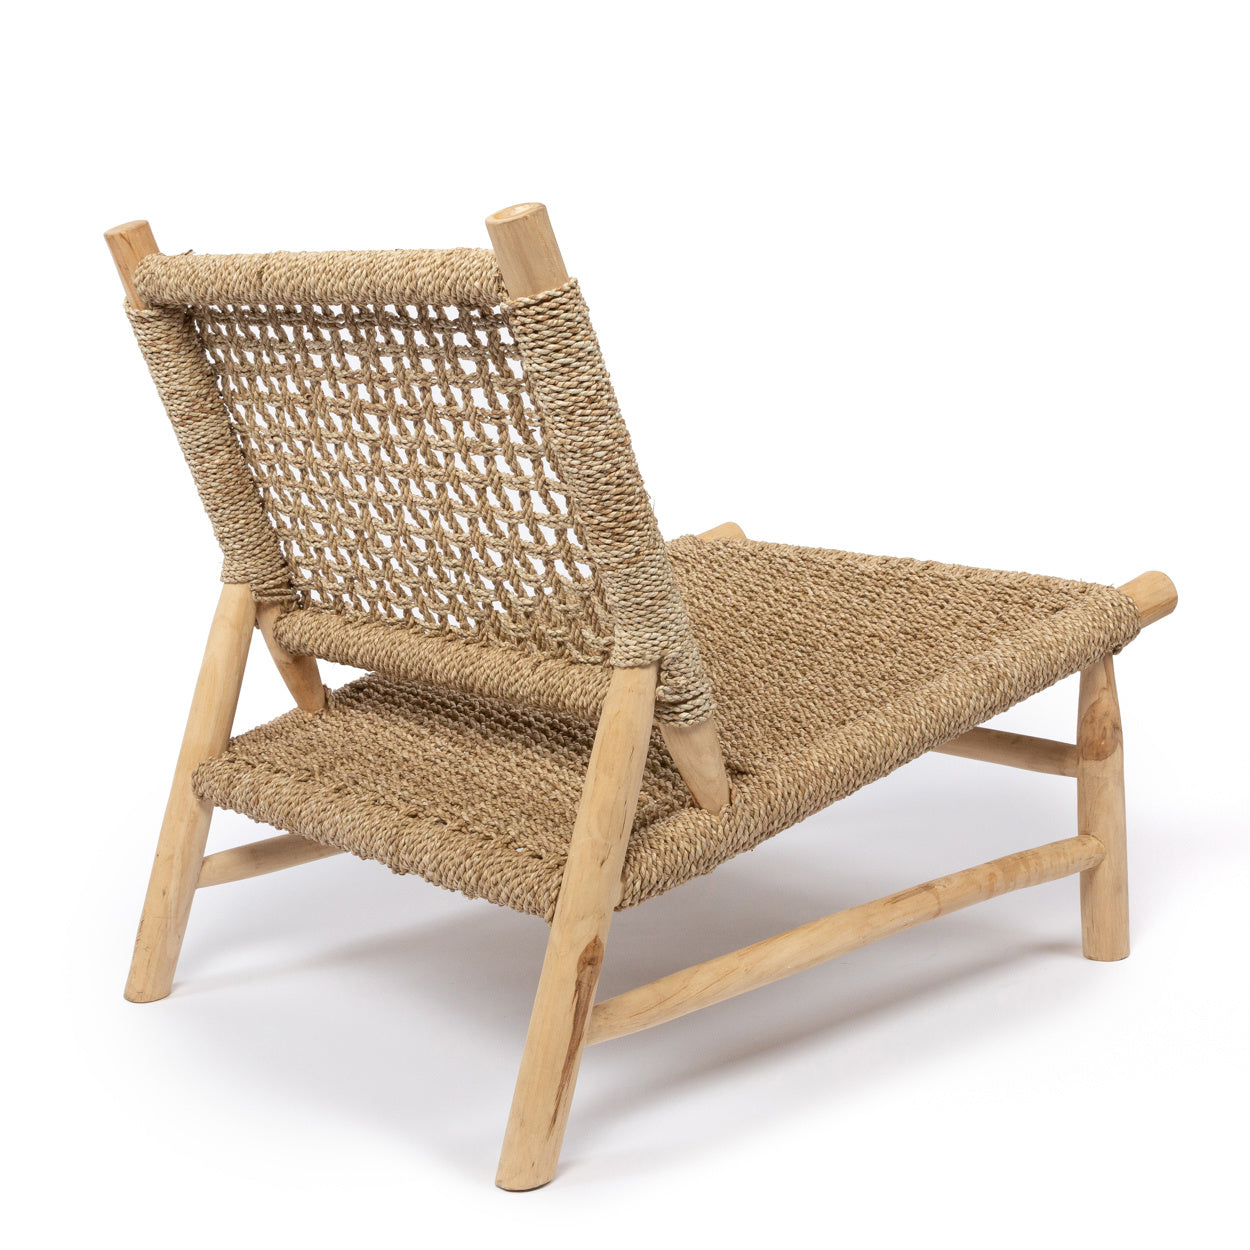 THE ISLAND SISAL One Seater Chair backside view